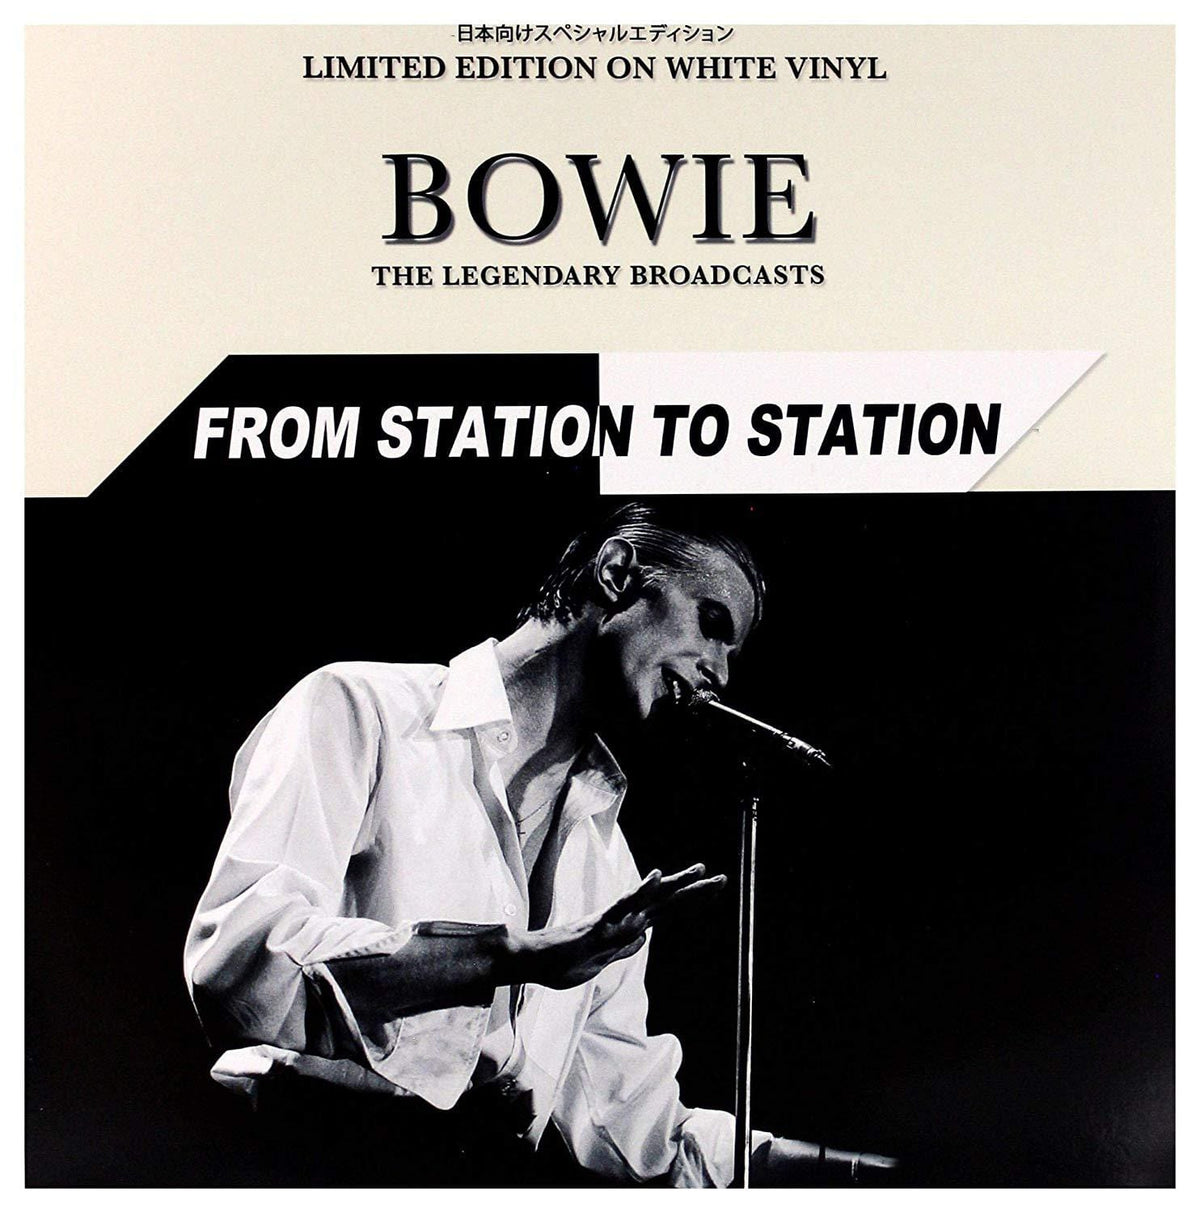 DAVID BOWIE - FROM STATION TO STATION: LIMITED EDITION (WHITE VINYL) [VINYL]